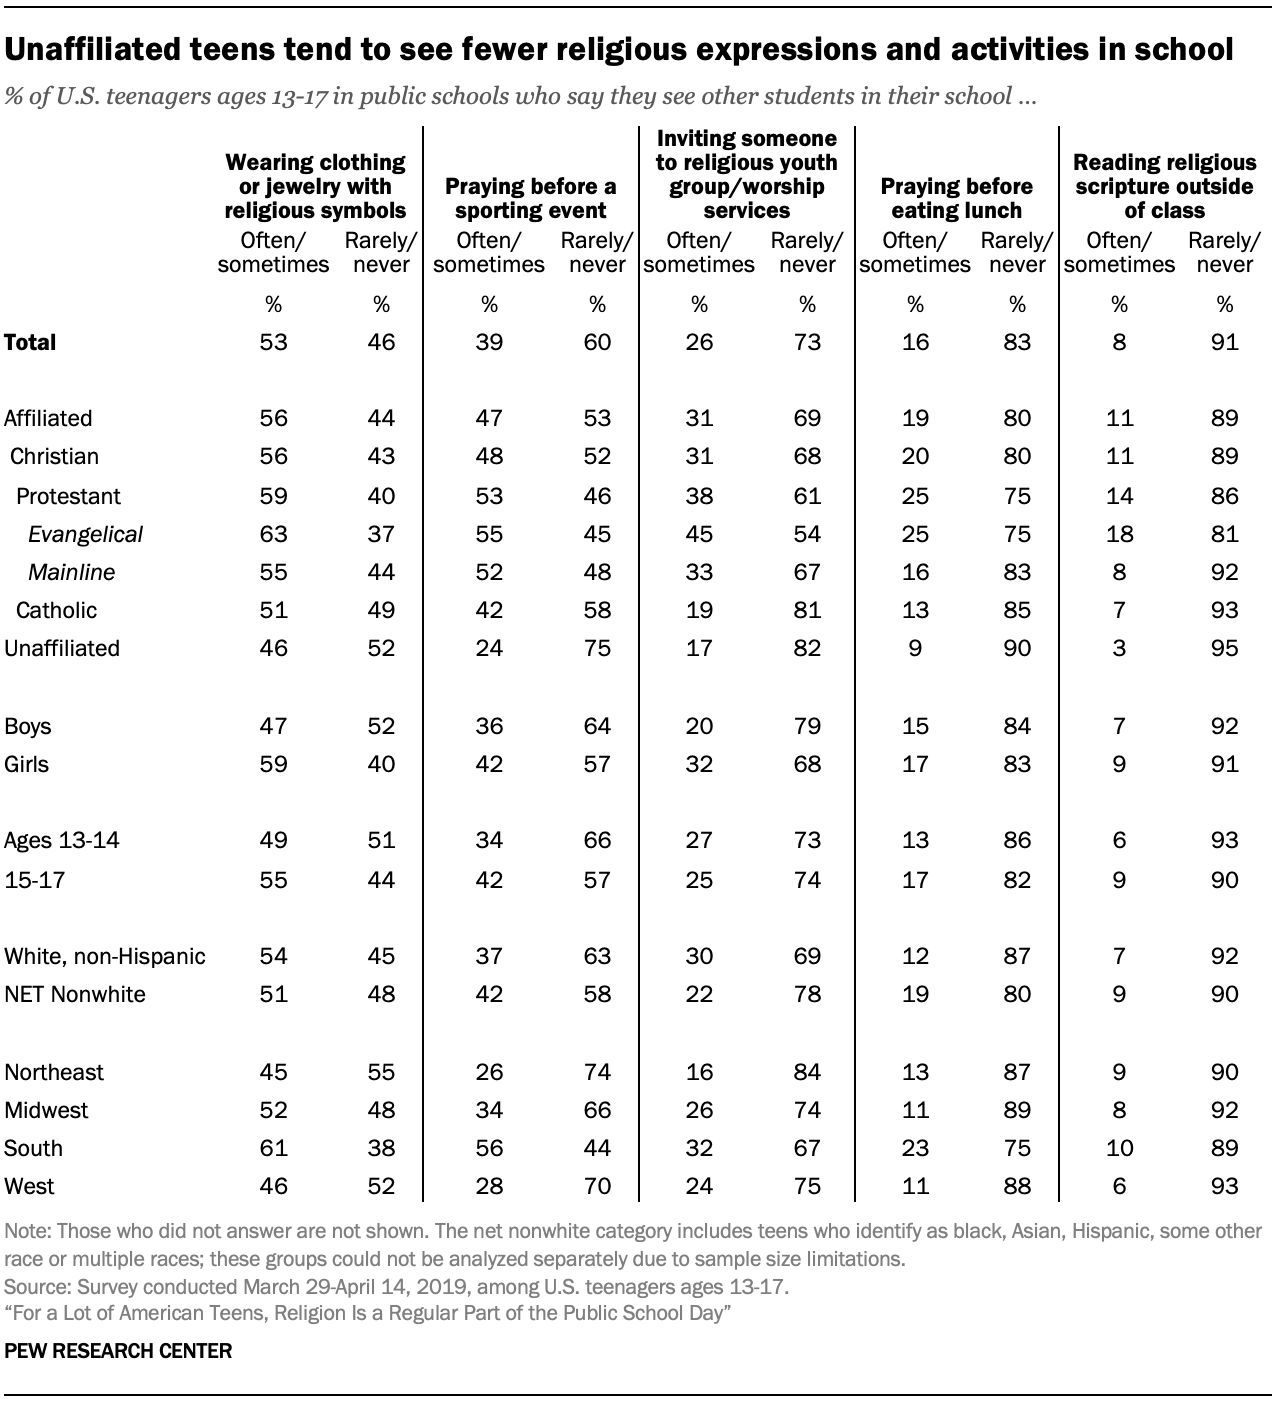 Unaffiliated teens tend to see fewer religious expressions and activities in school